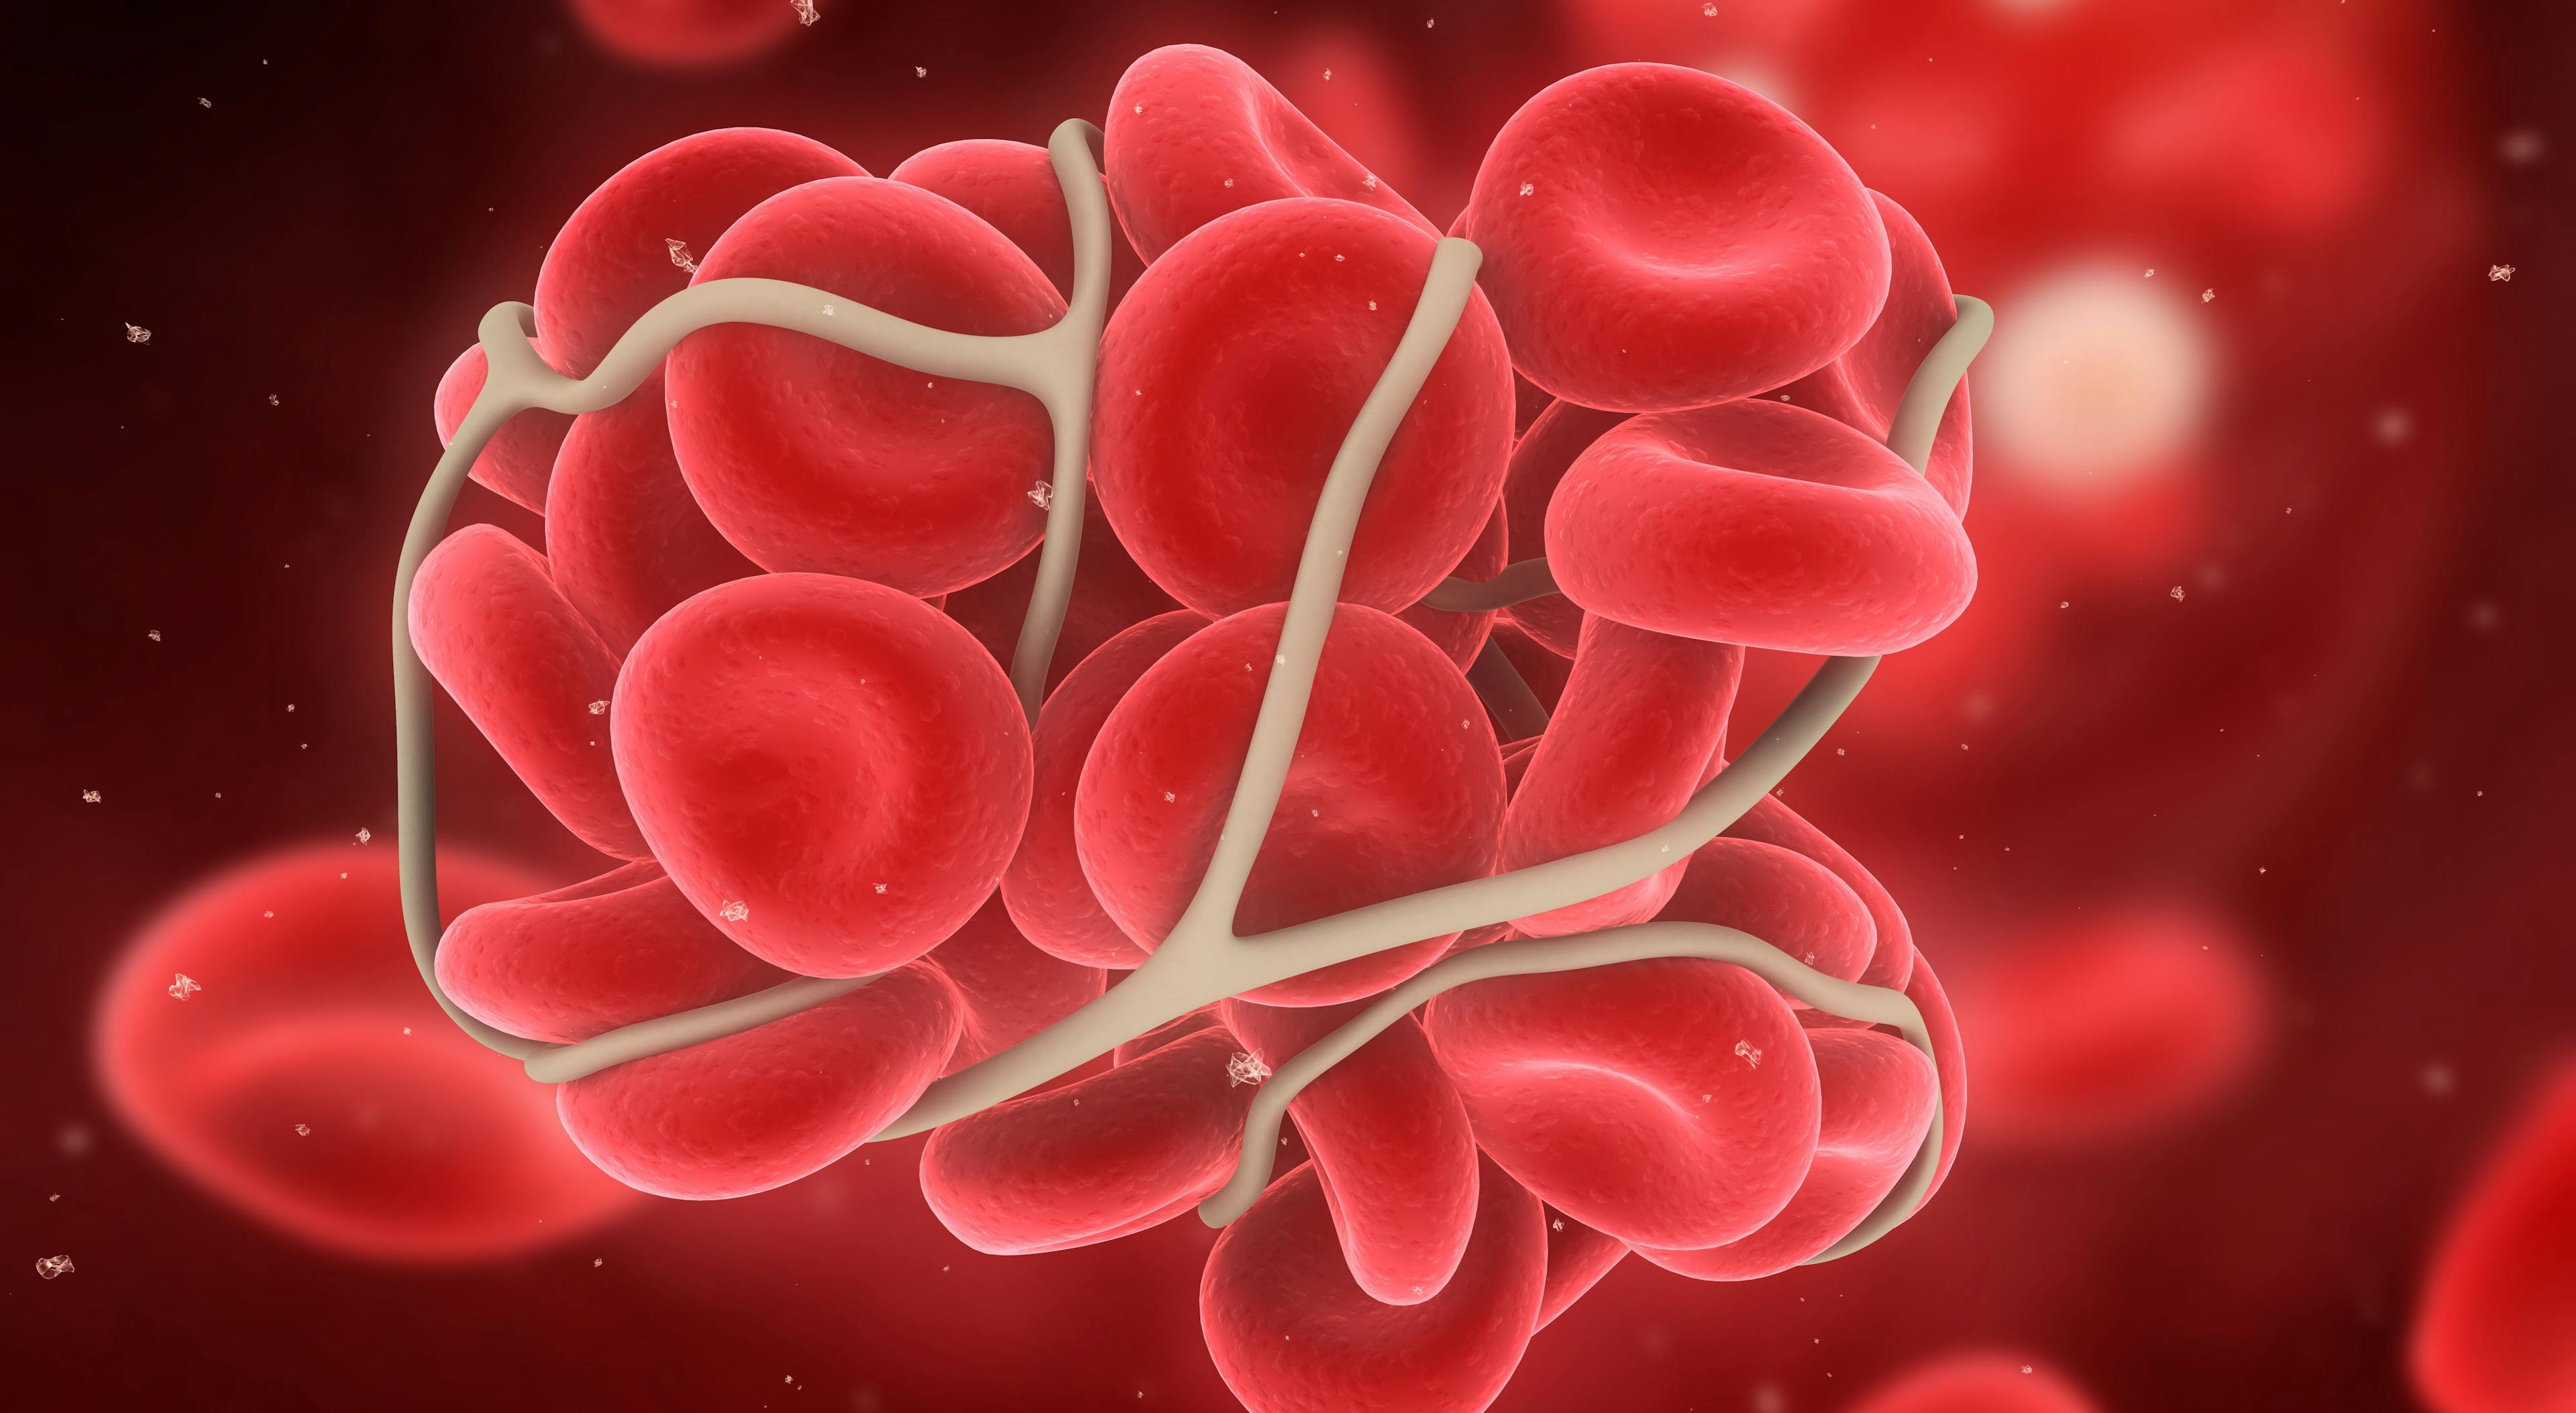 Patients With Myeloproliferative Neoplasms May Have Increased Thrombosis Risk